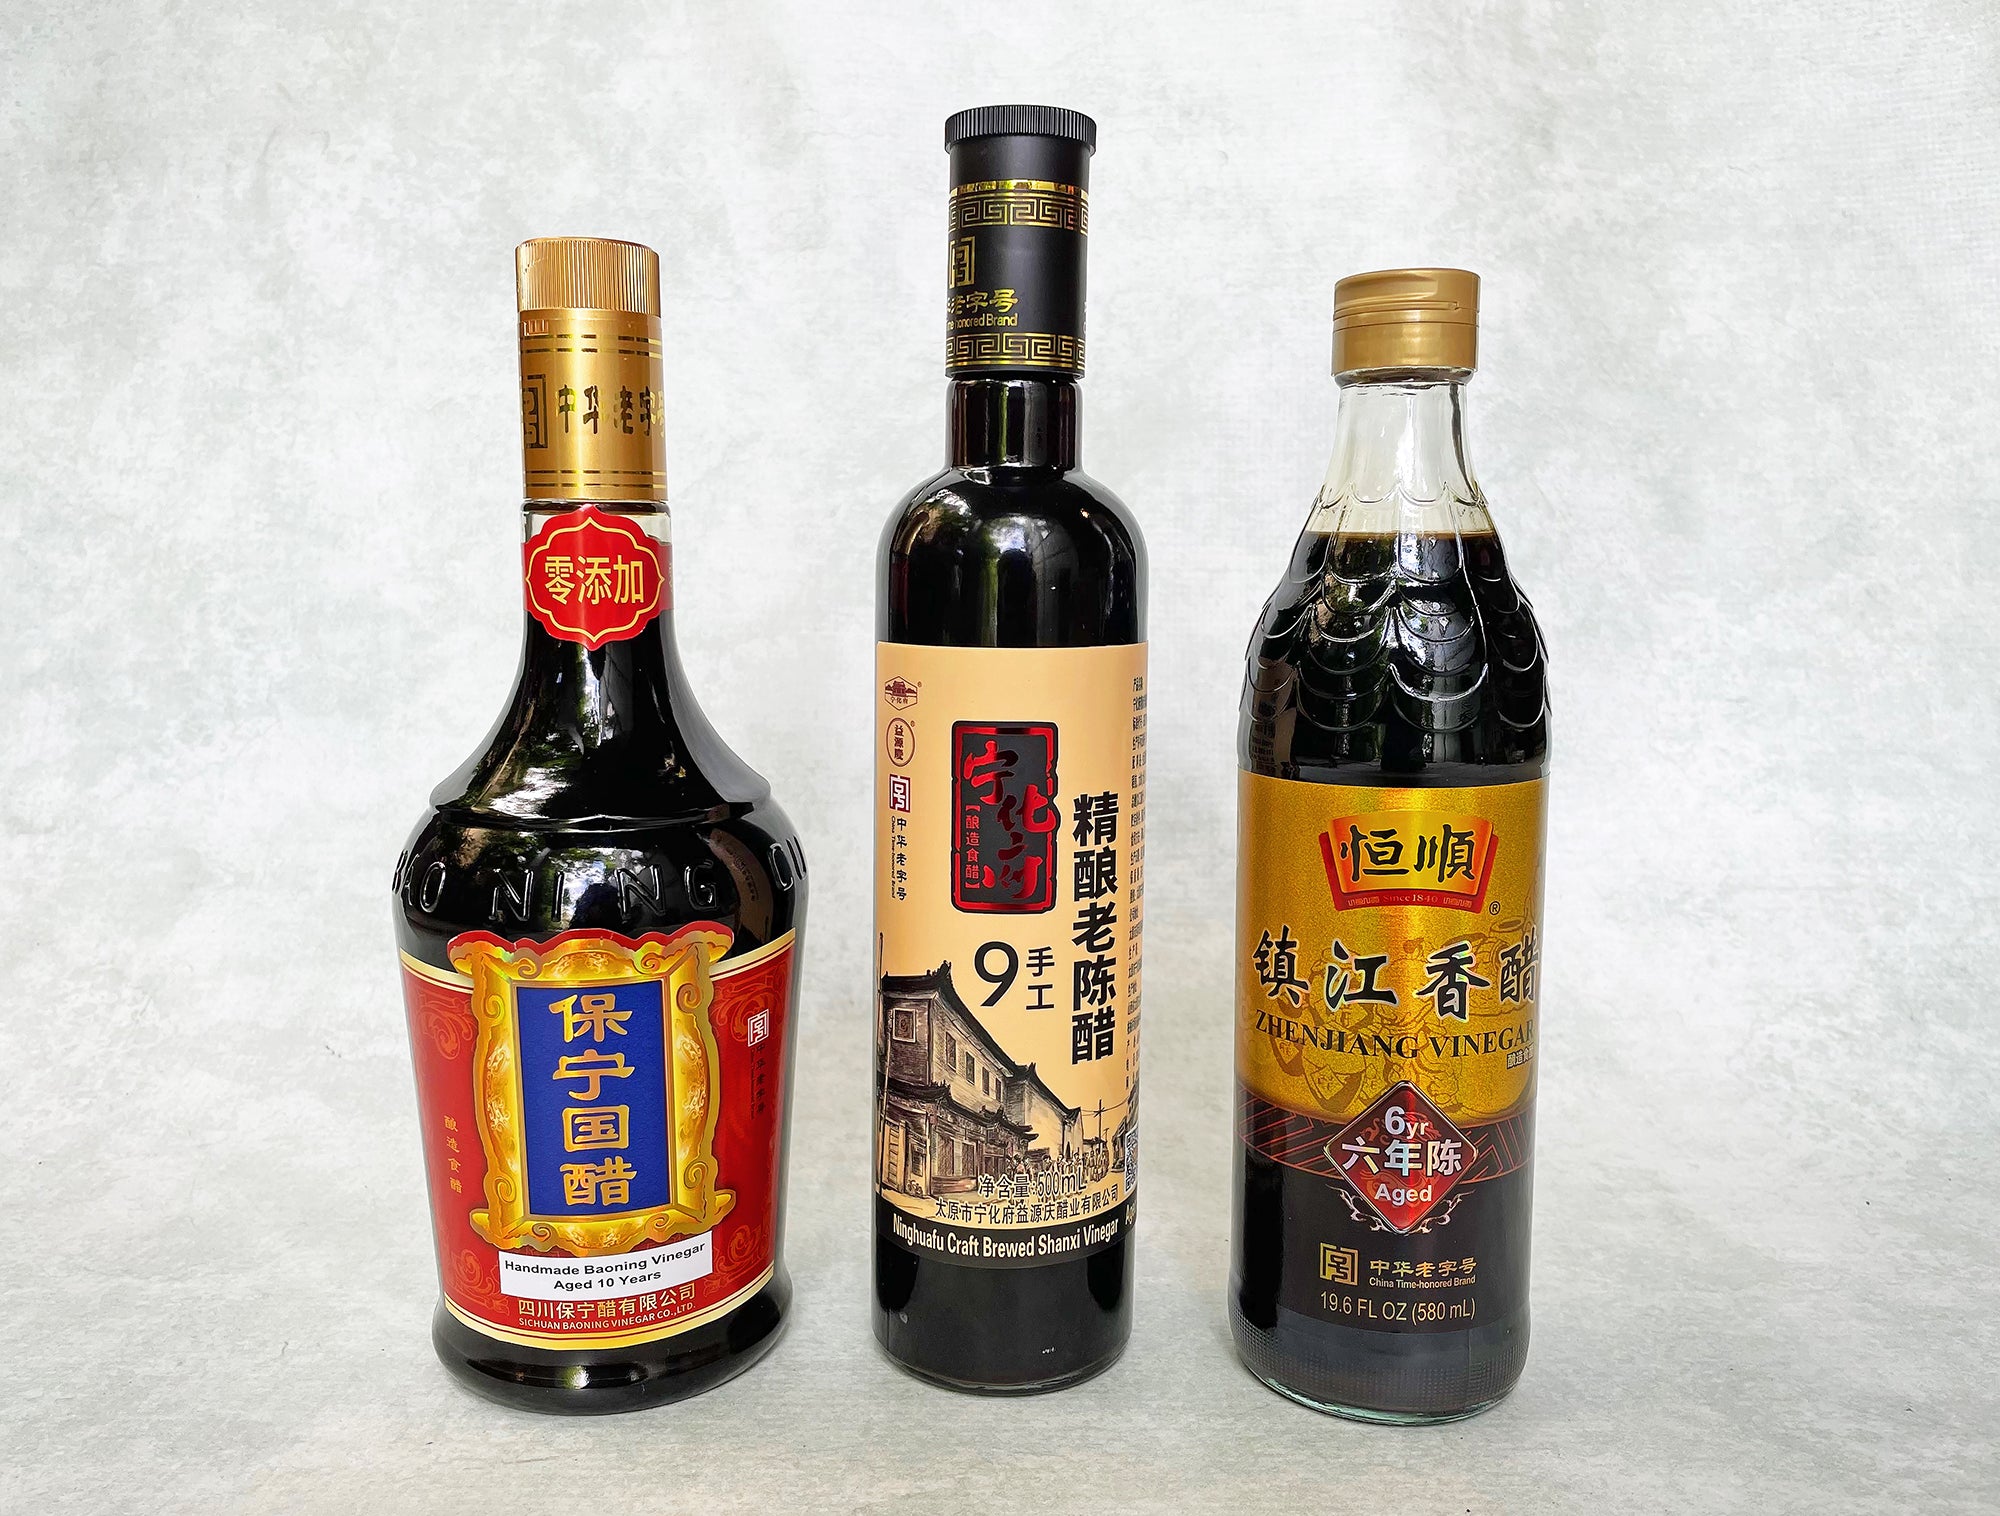 China's Famous Vinegars Collection